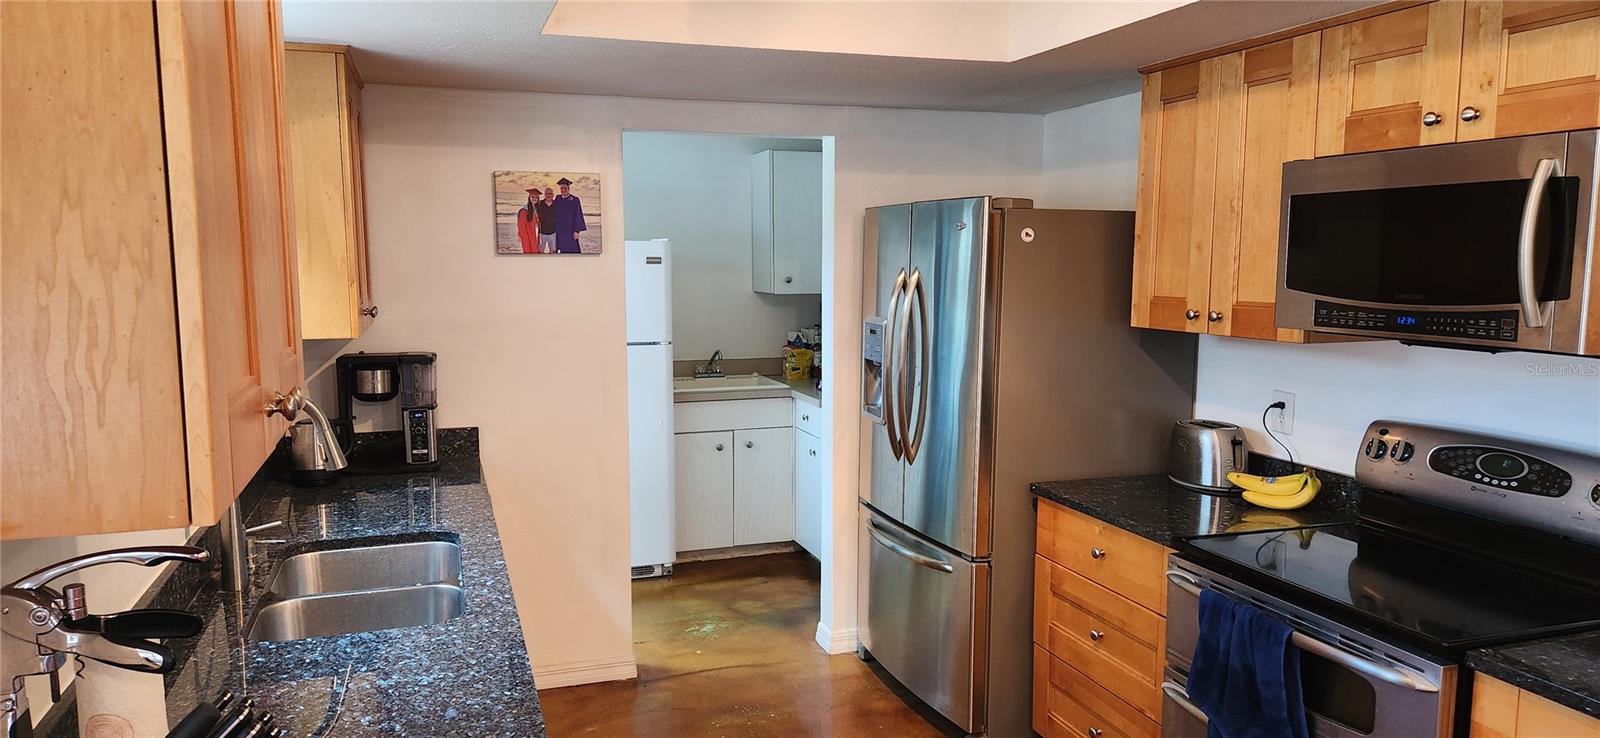 Pantry and washer/dryer off Kitchen